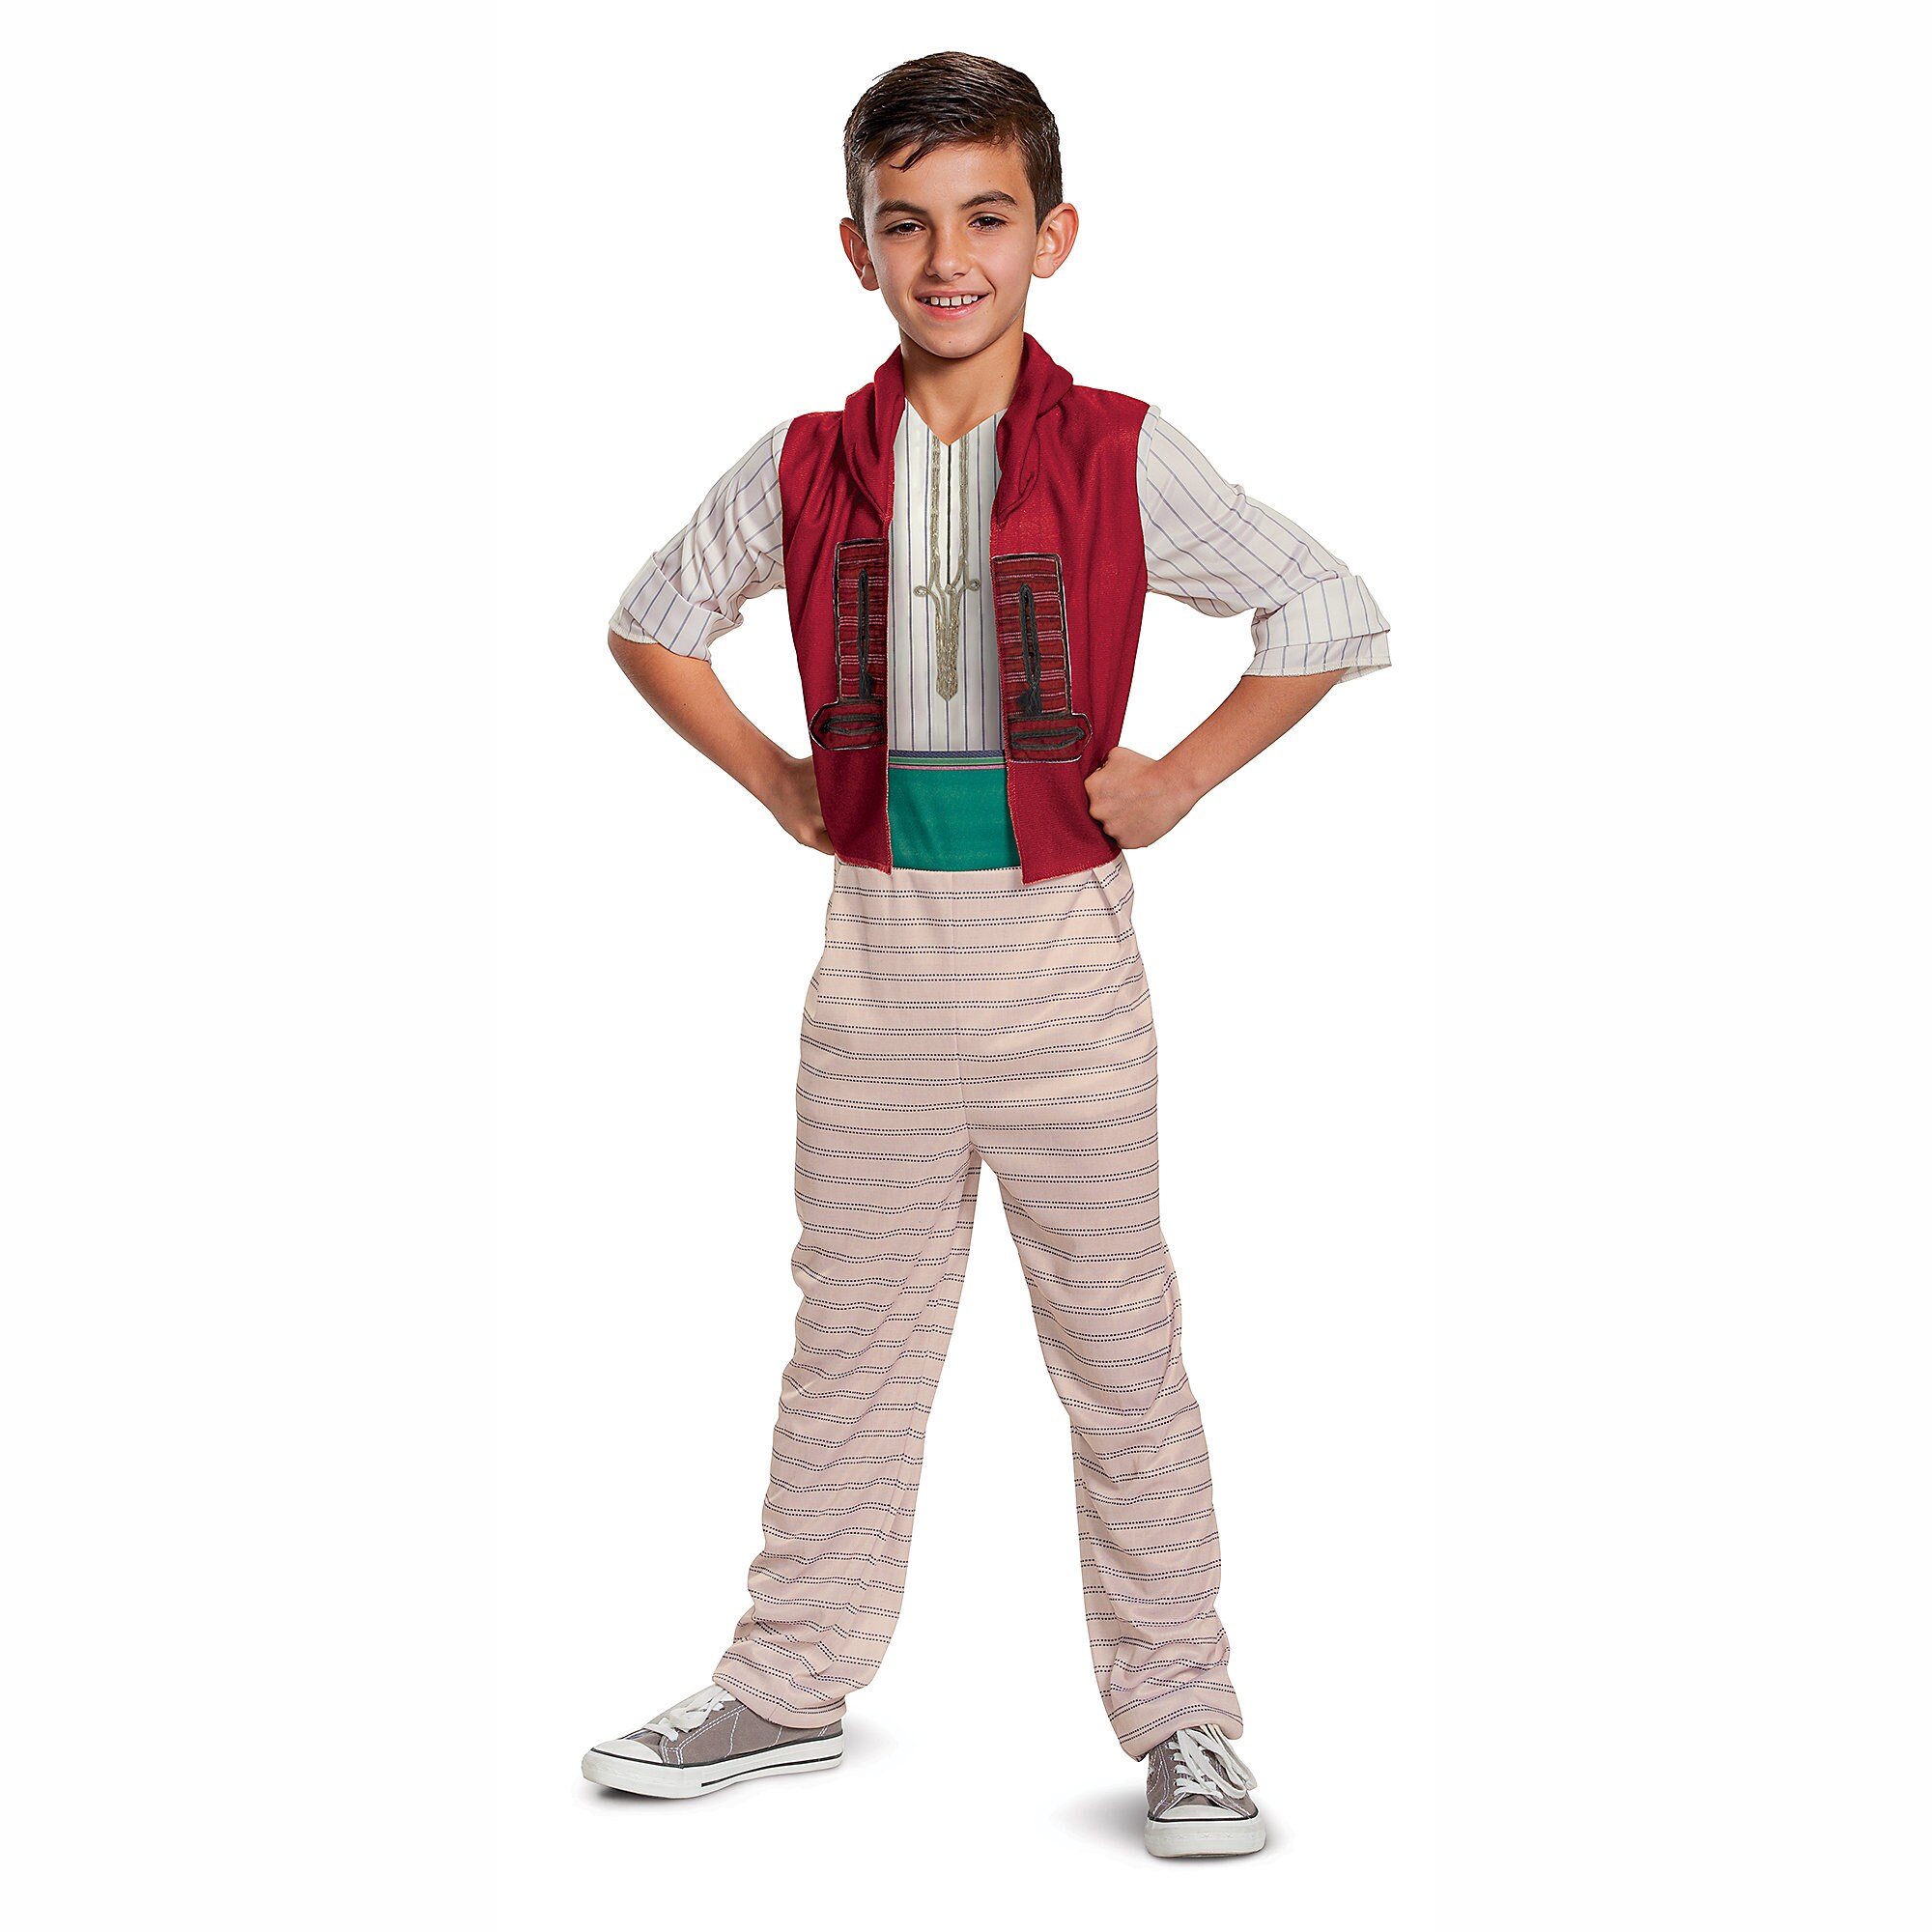 Aladdin Costume for Kids by Disguise - Live Action Film